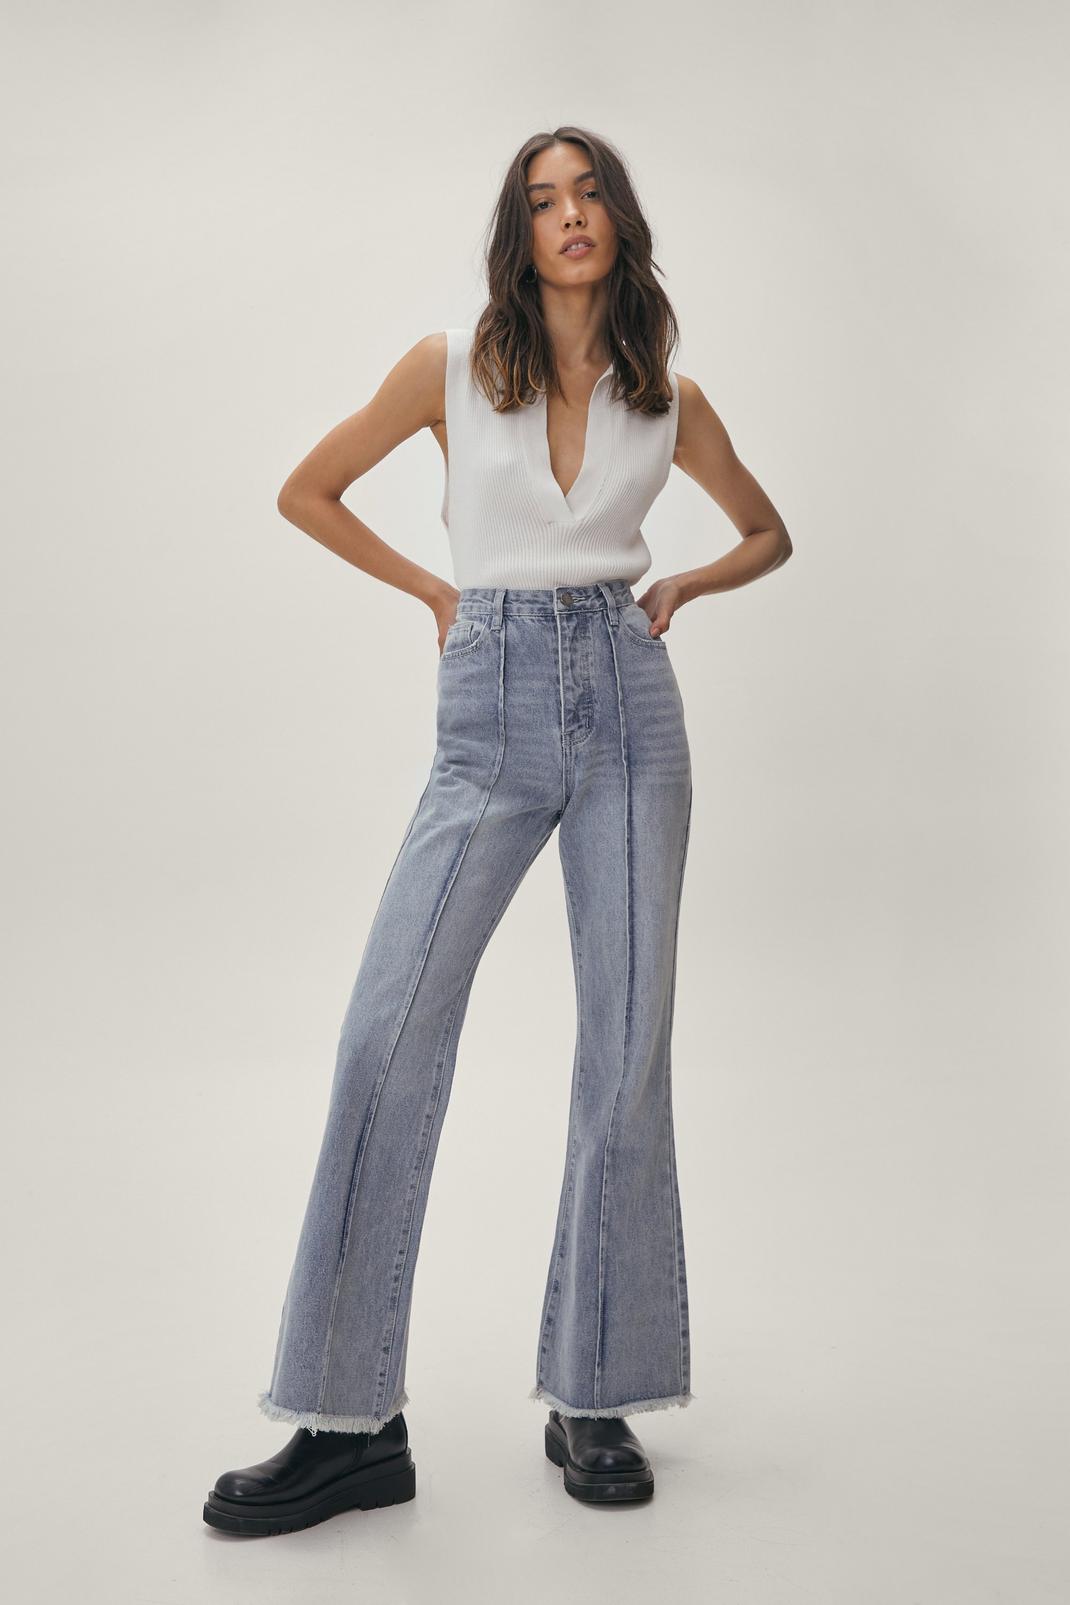 Denim Seam Detail Fit and Flare Jeans